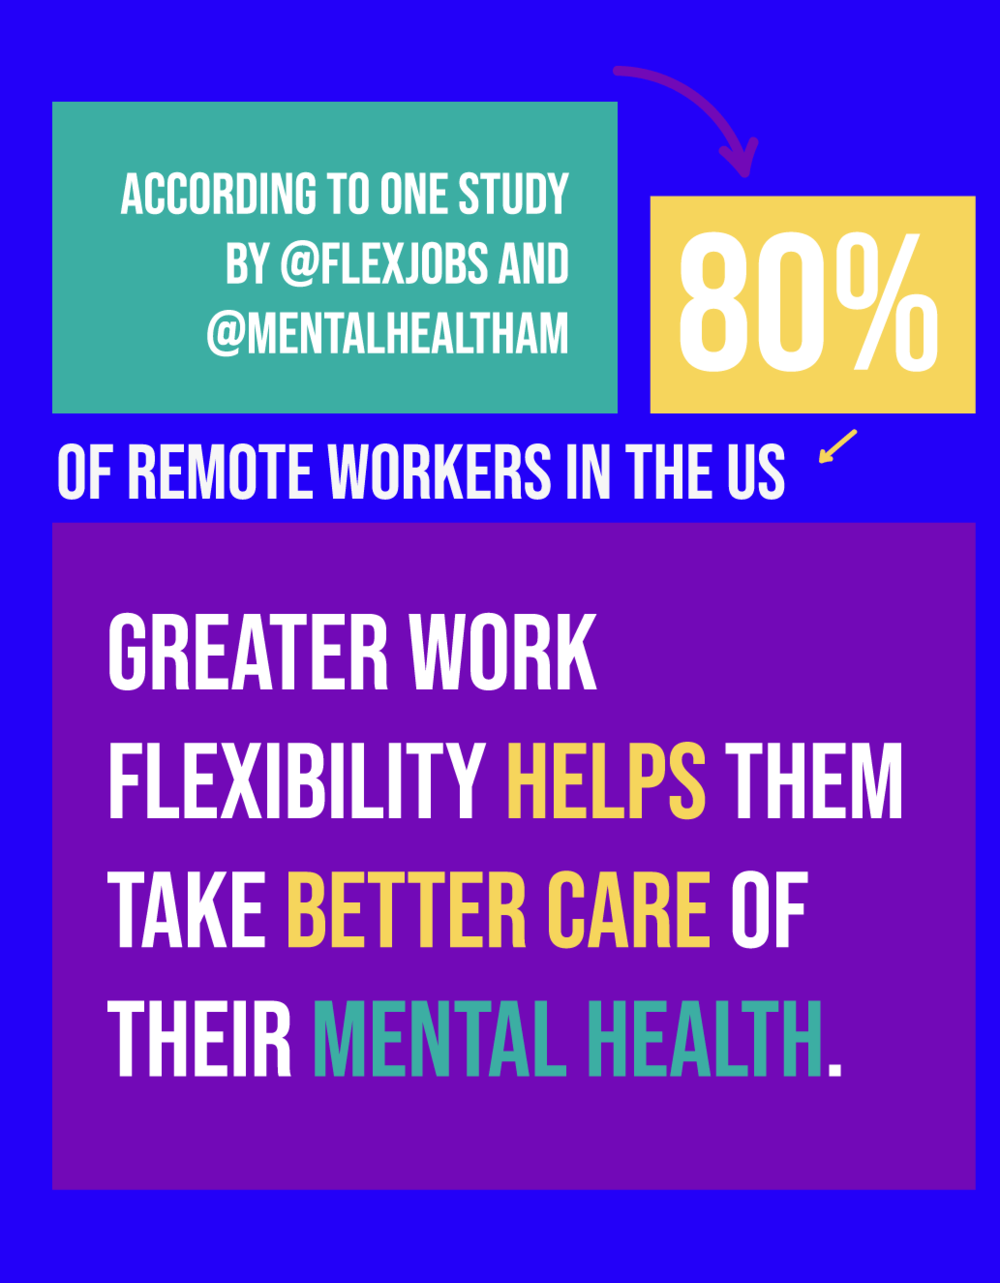 over 80% of remote workers believe greater work flexibility helps them take better care of their mental health